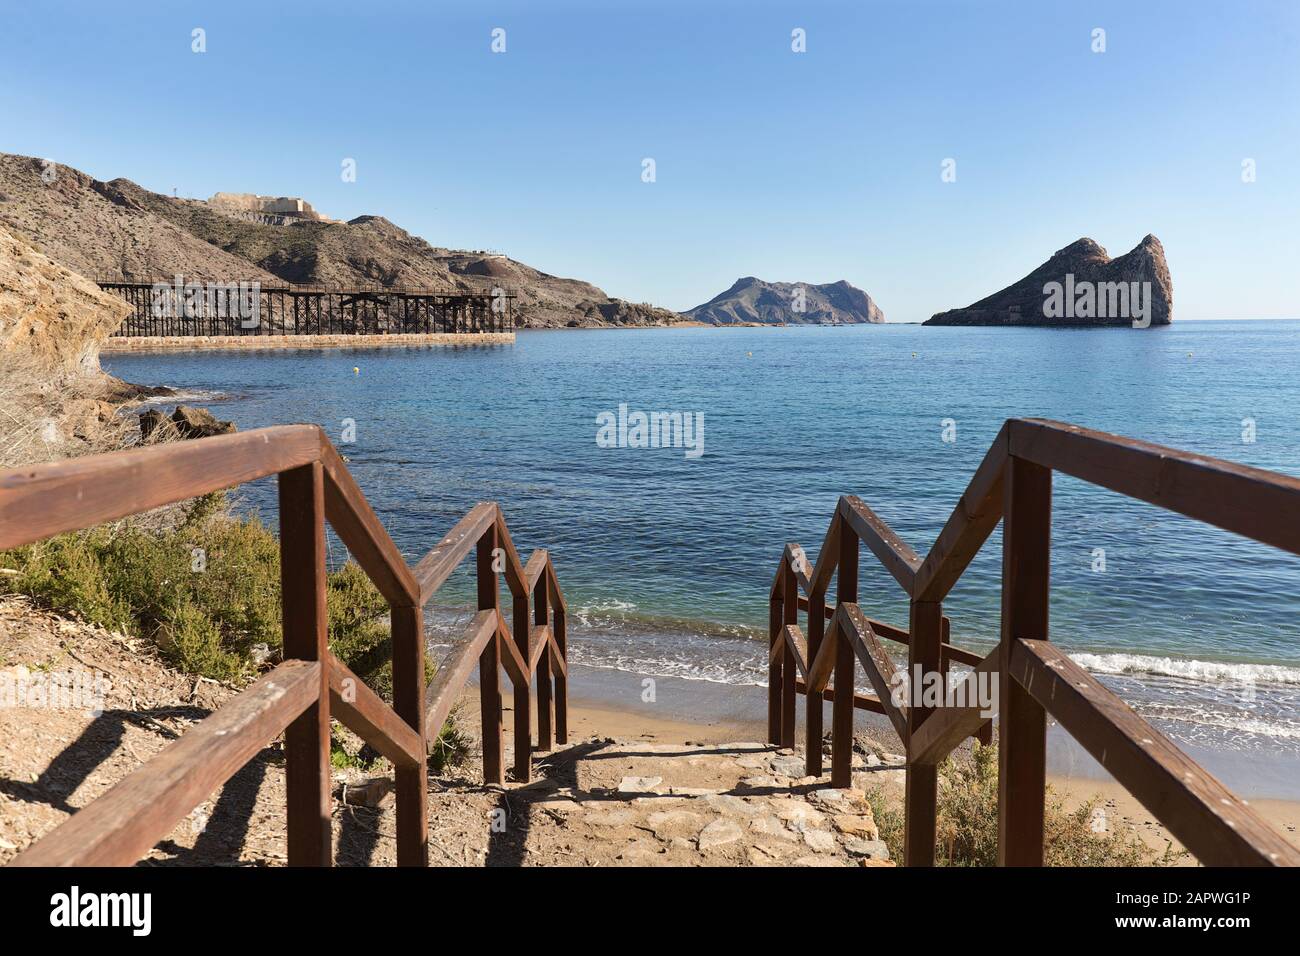 Cookers Beach in the town of Aguilas, province of Murcia, Spain Stock Photo